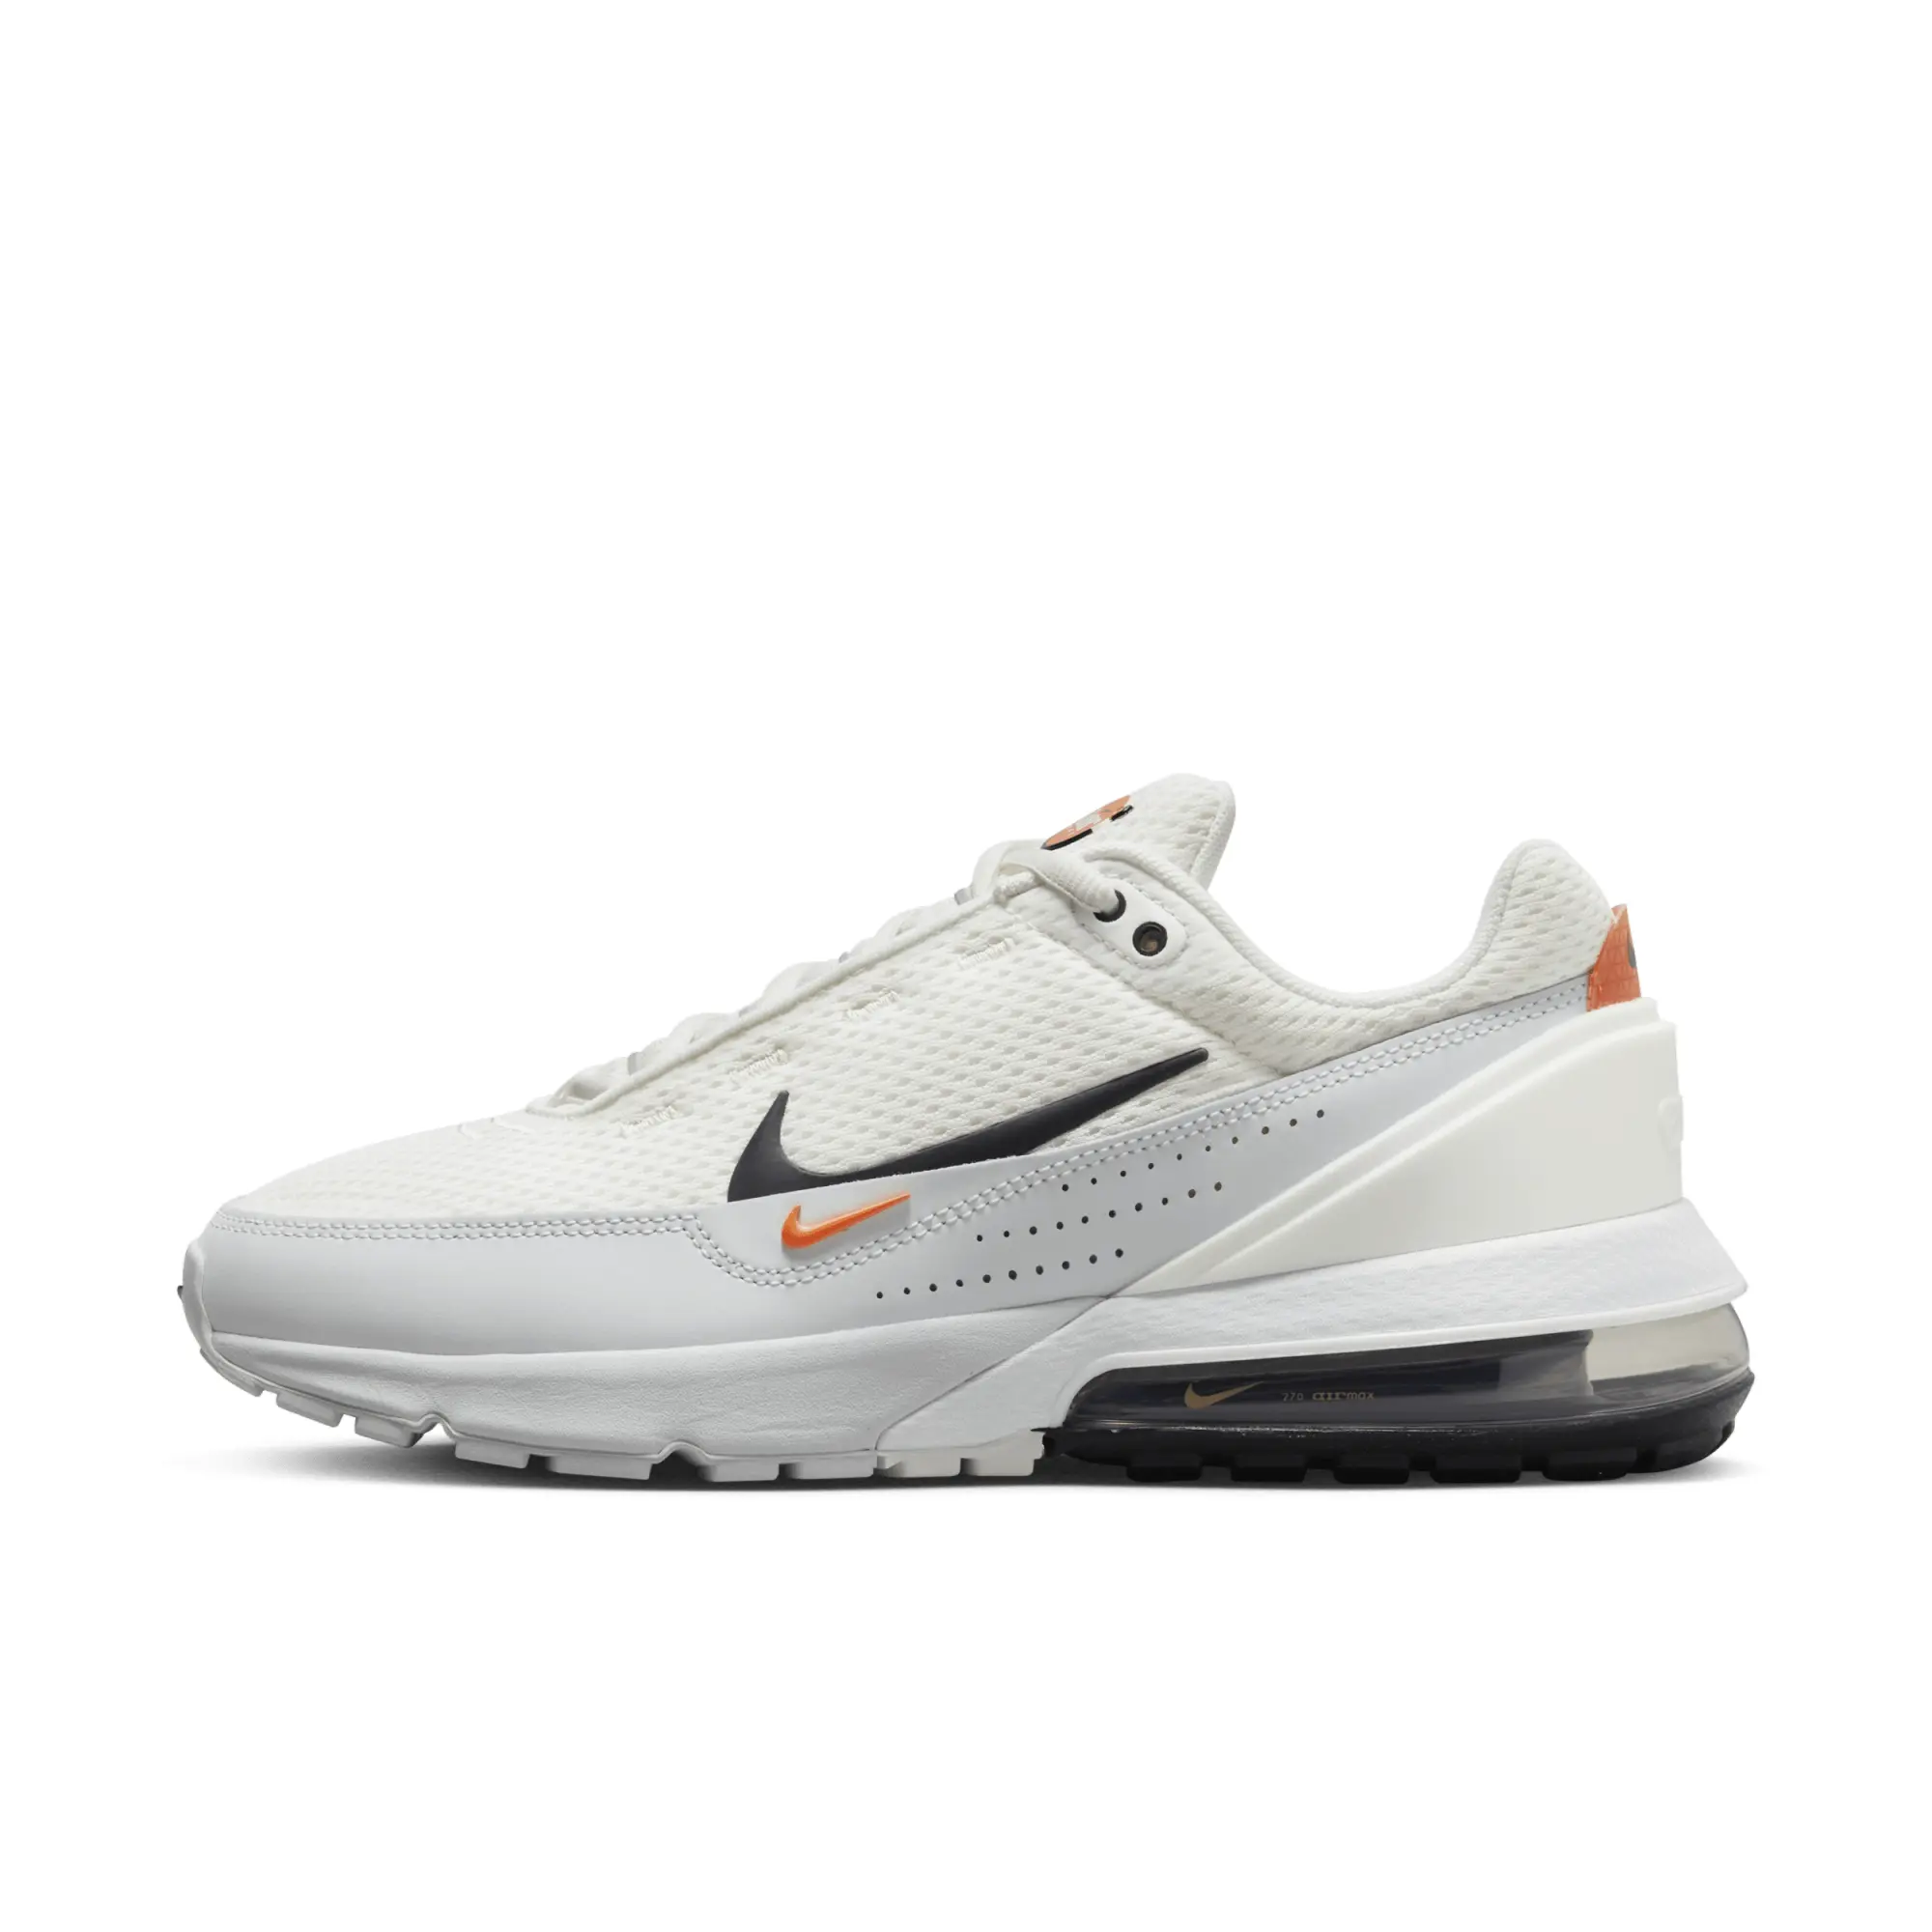 Nike Air Max Pulse Trainers In White, Black And Orange